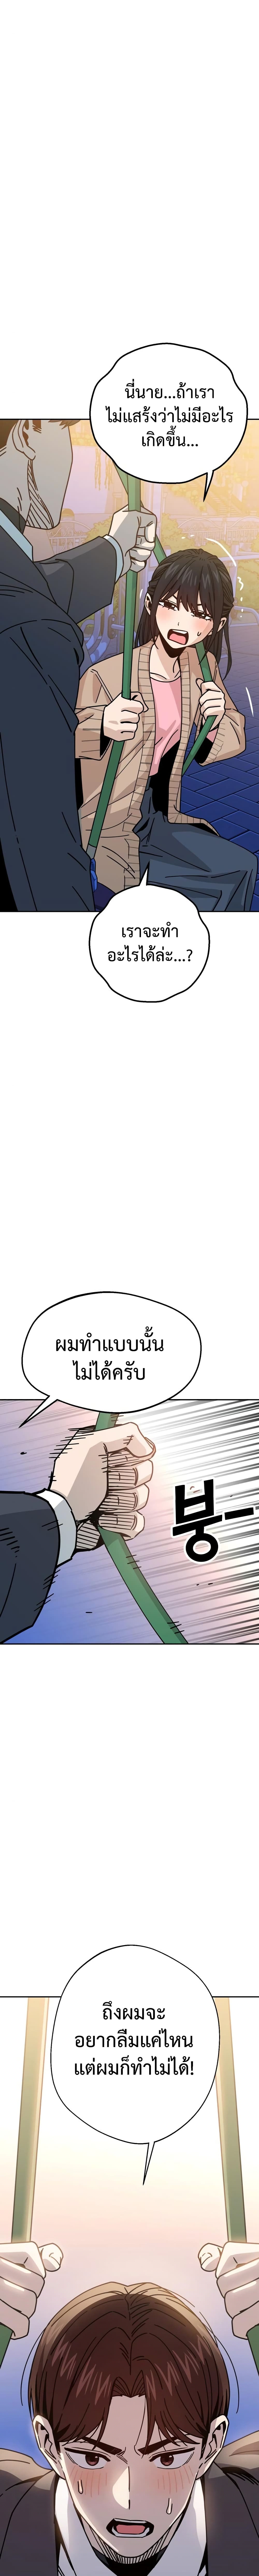 Match Made in Heaven by chance ตอนที่ 19 (17)